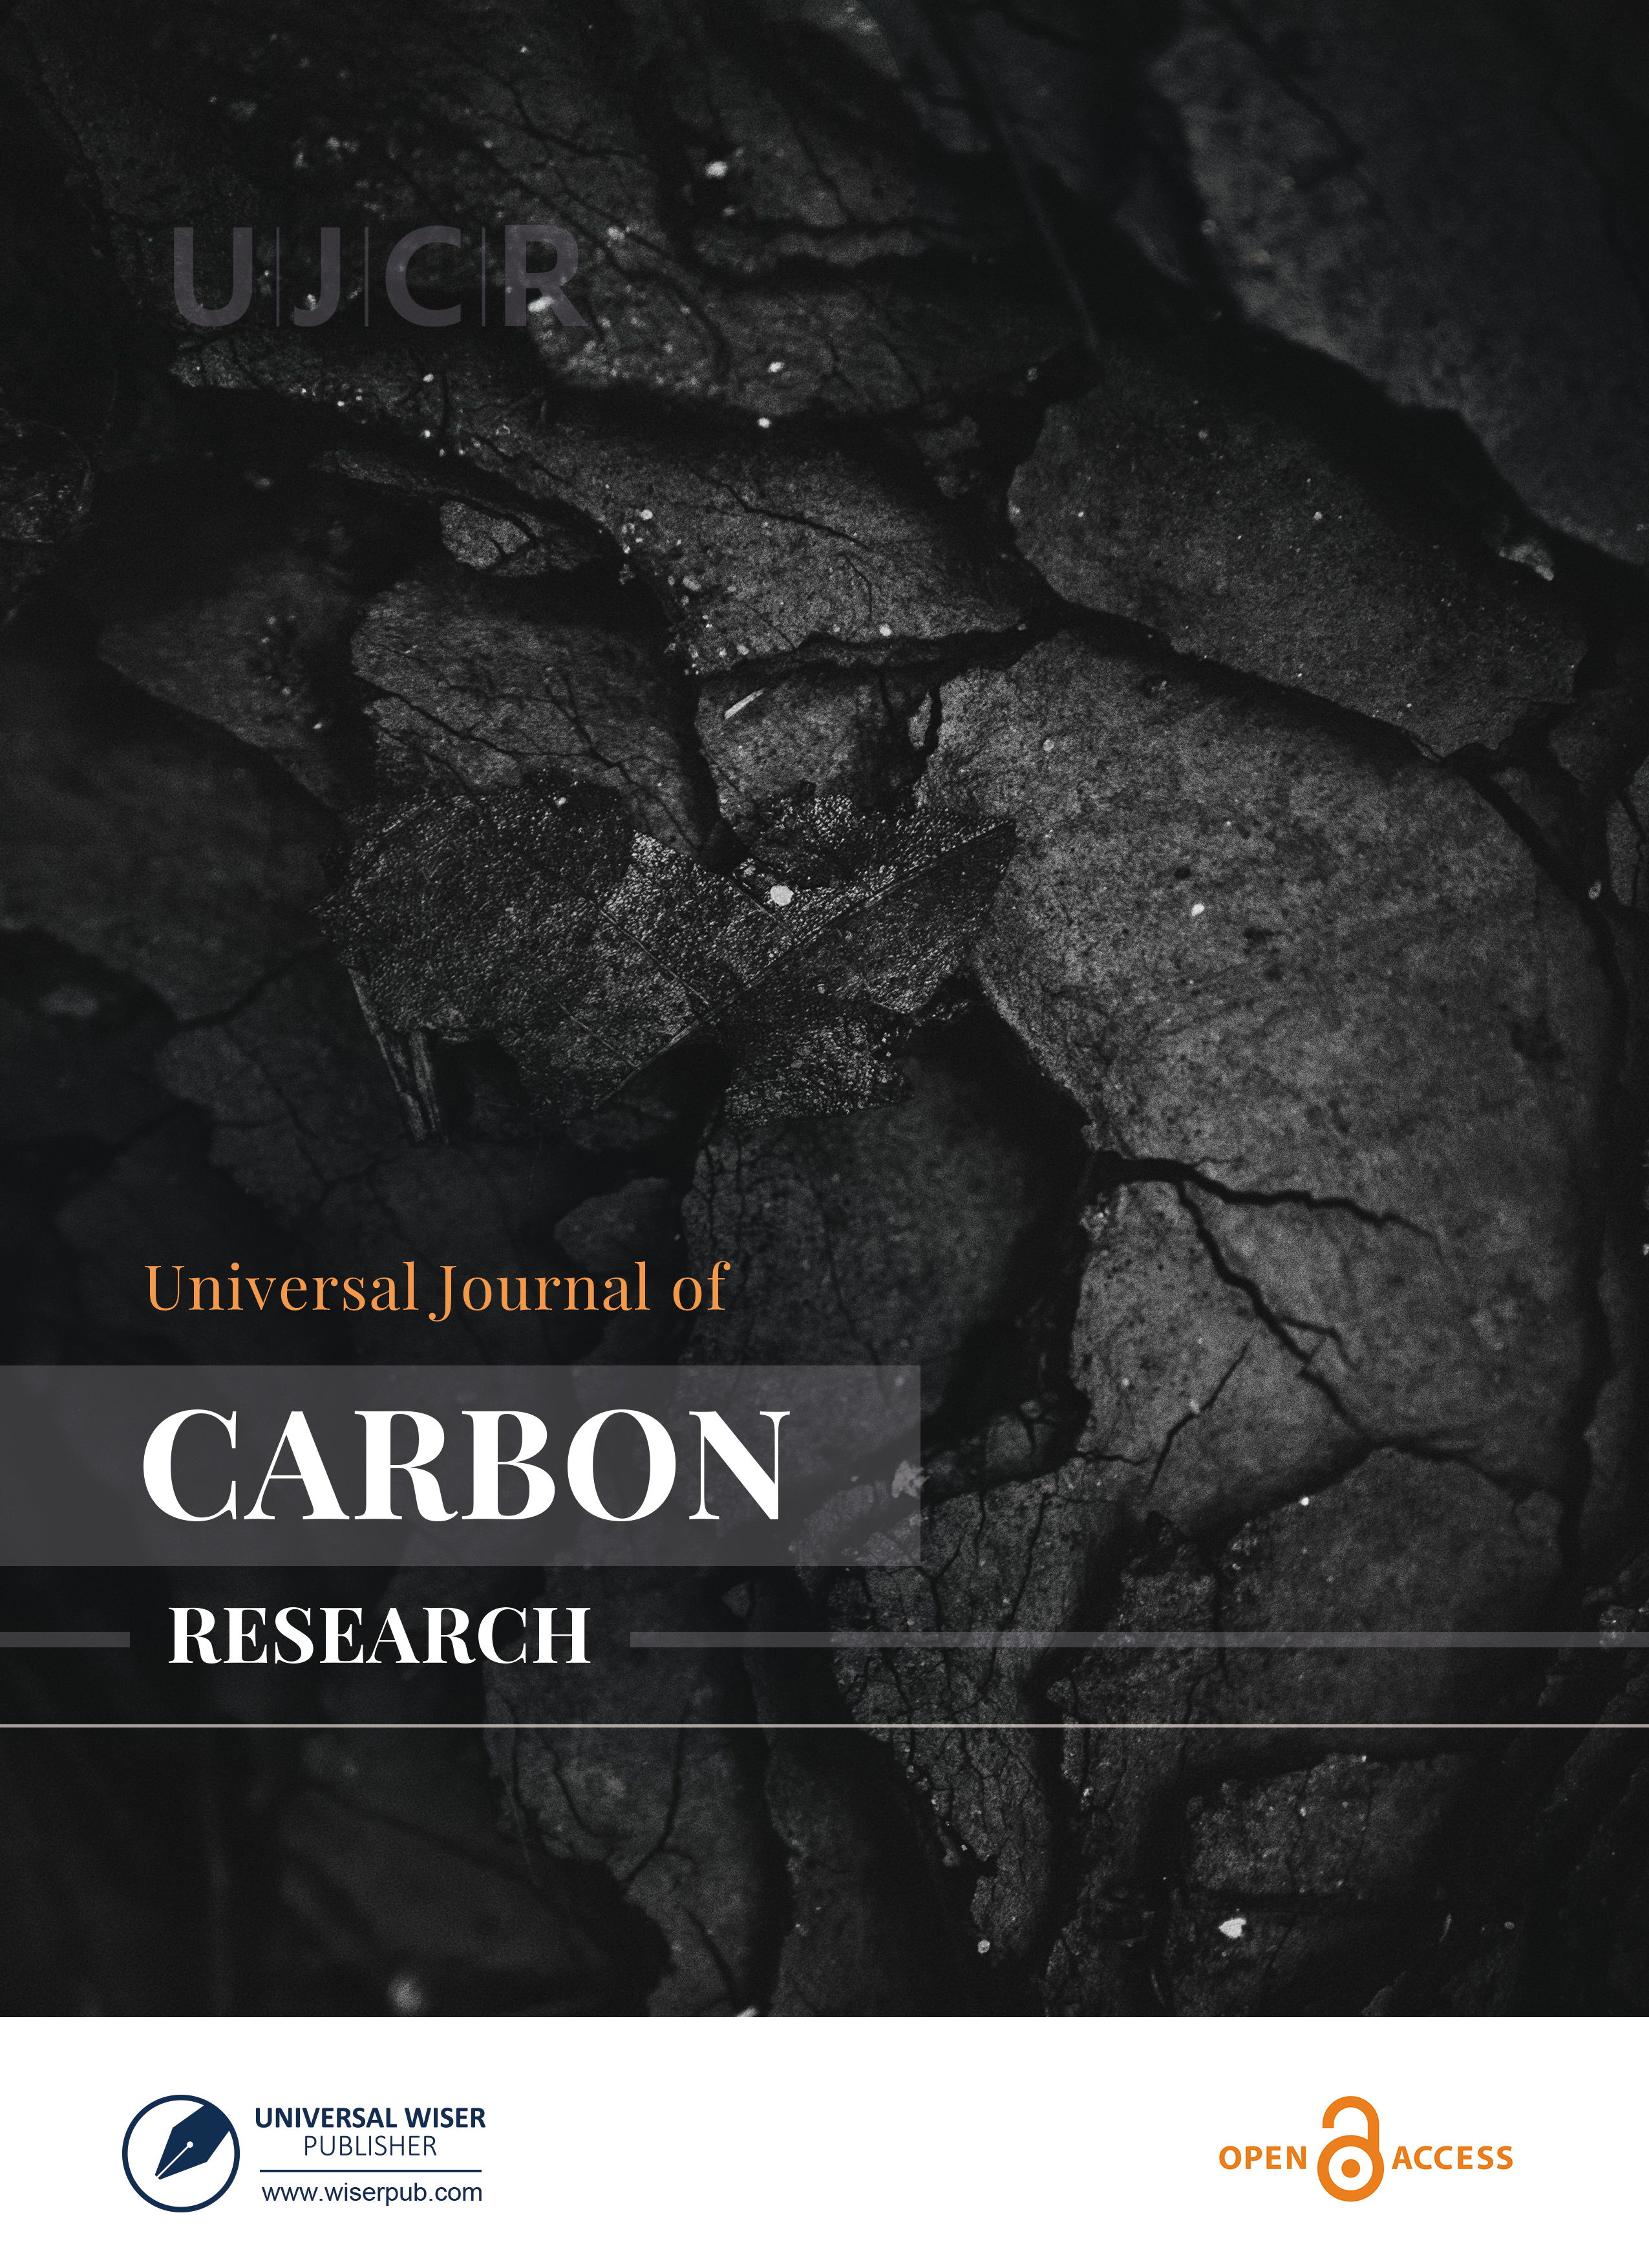 Universal Journal of Carbon Research